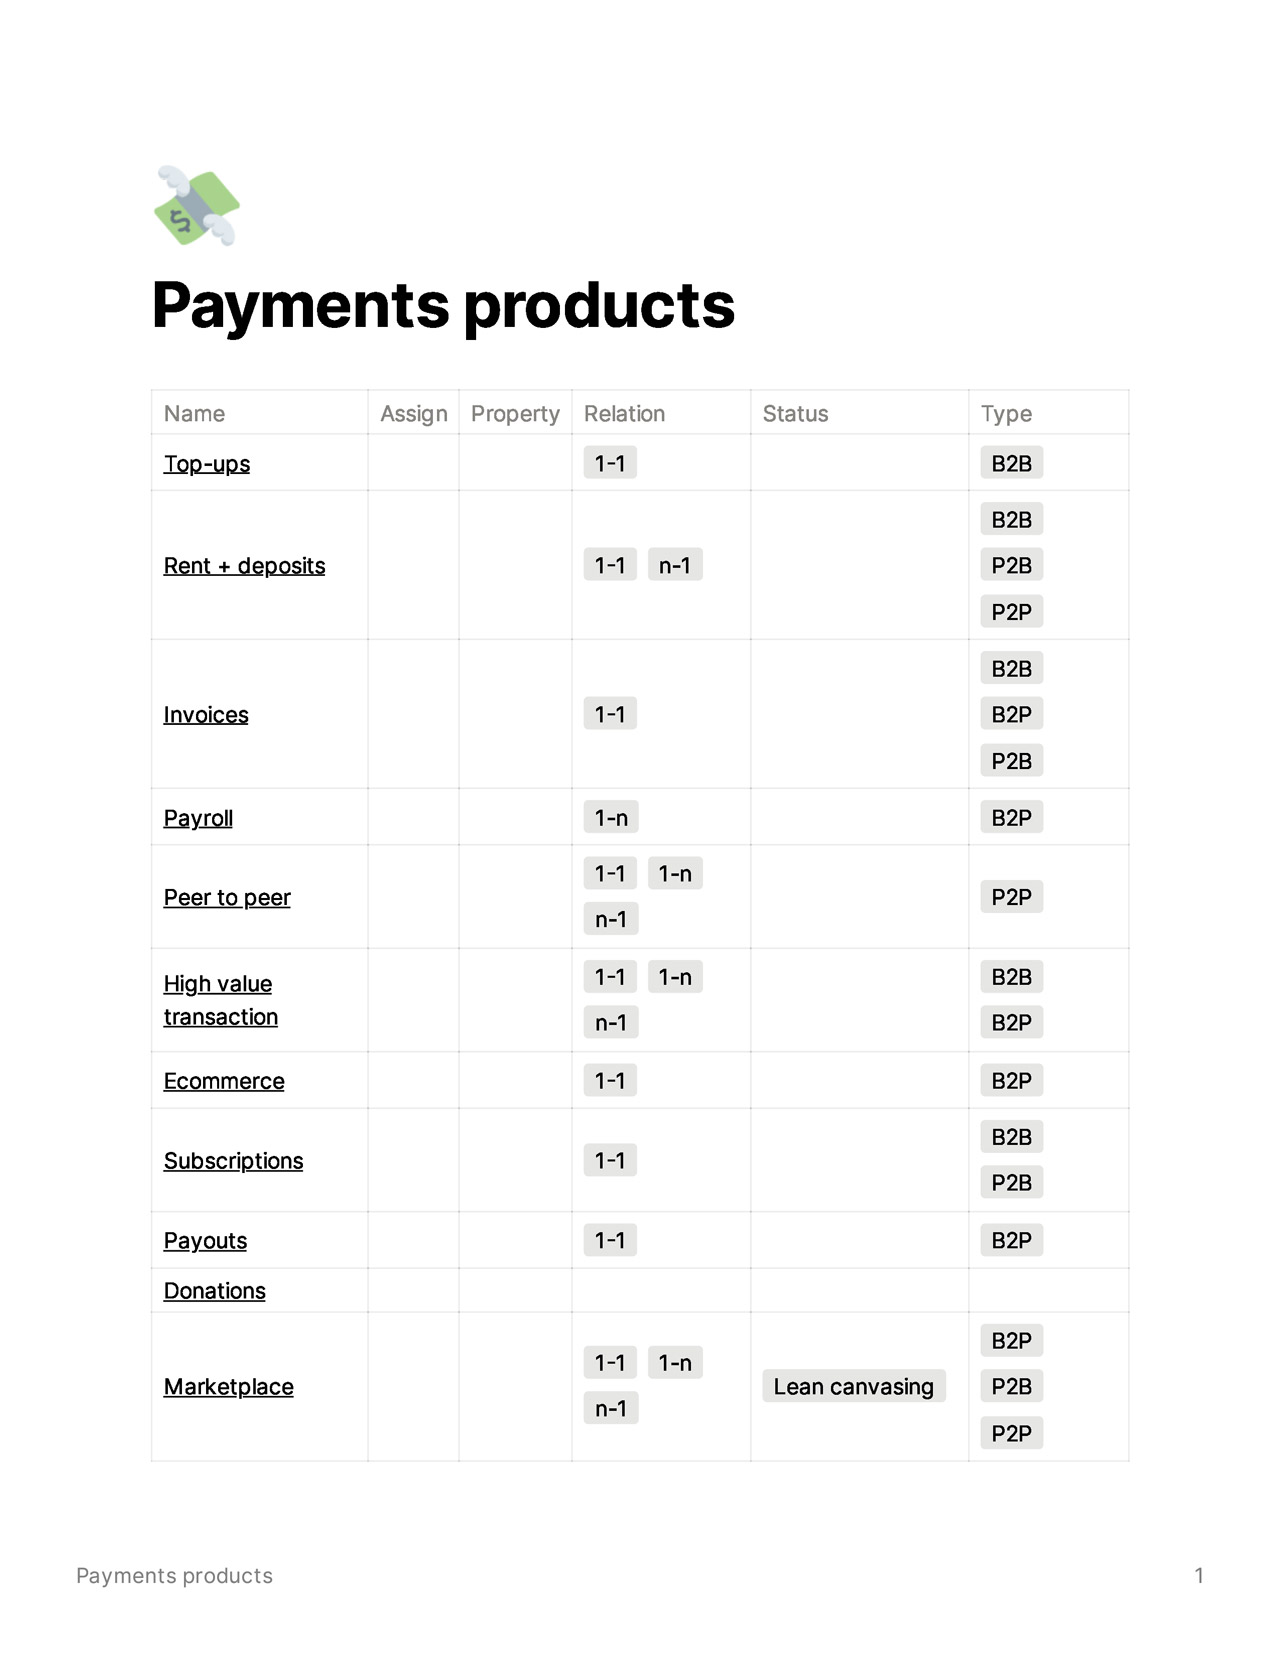 05_Payments_products